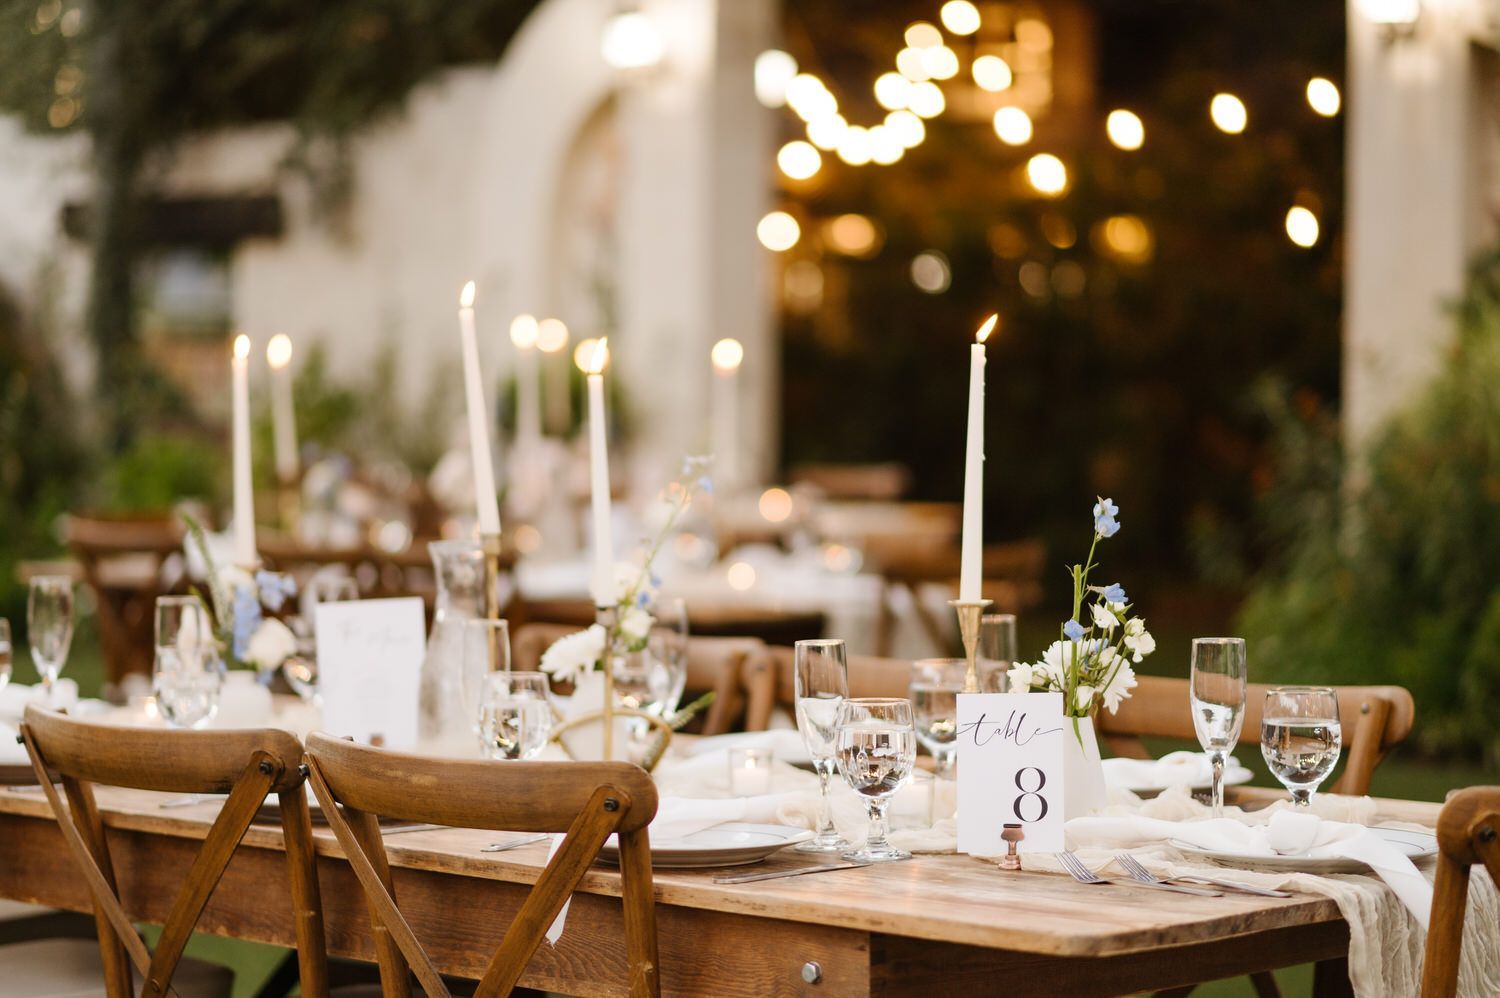 A table set for a wedding reception with candles and wine glasses.